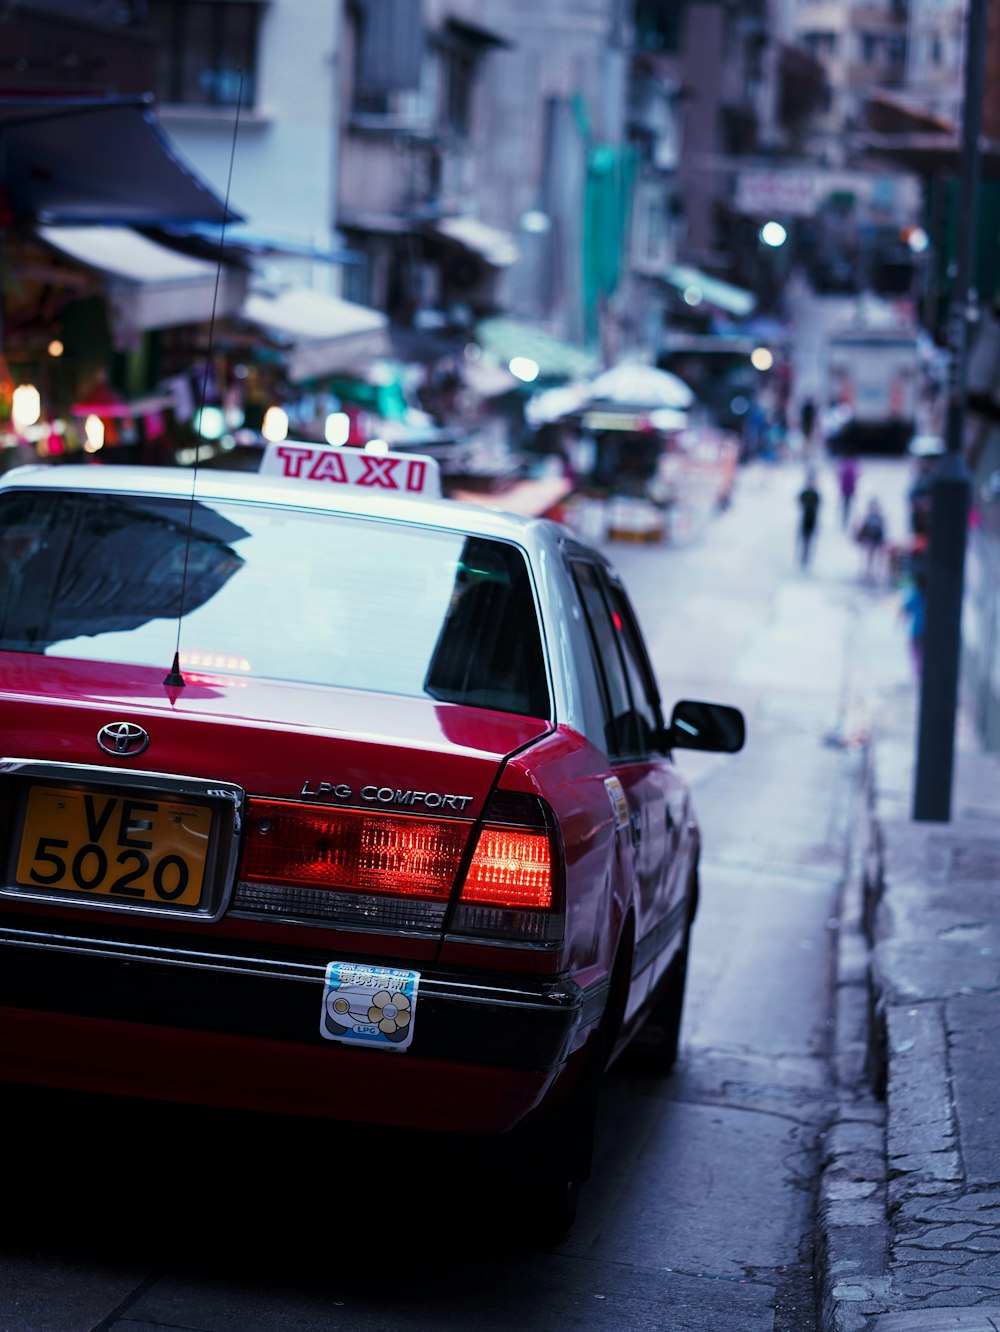 a red taxi cab parked on the side of a street